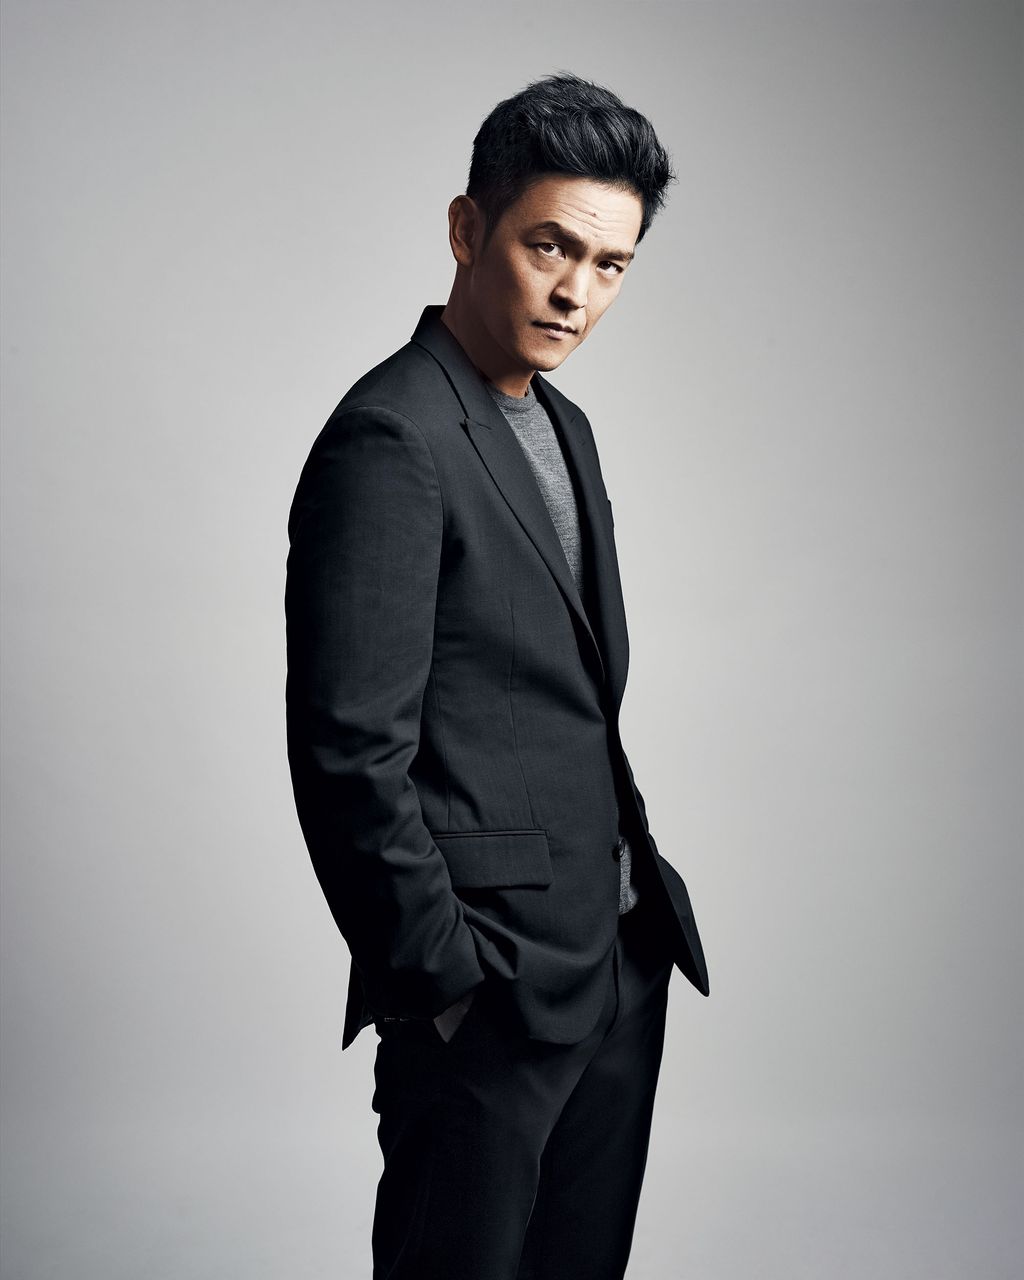 You Haven’t Seen Everything John Cho Can Do